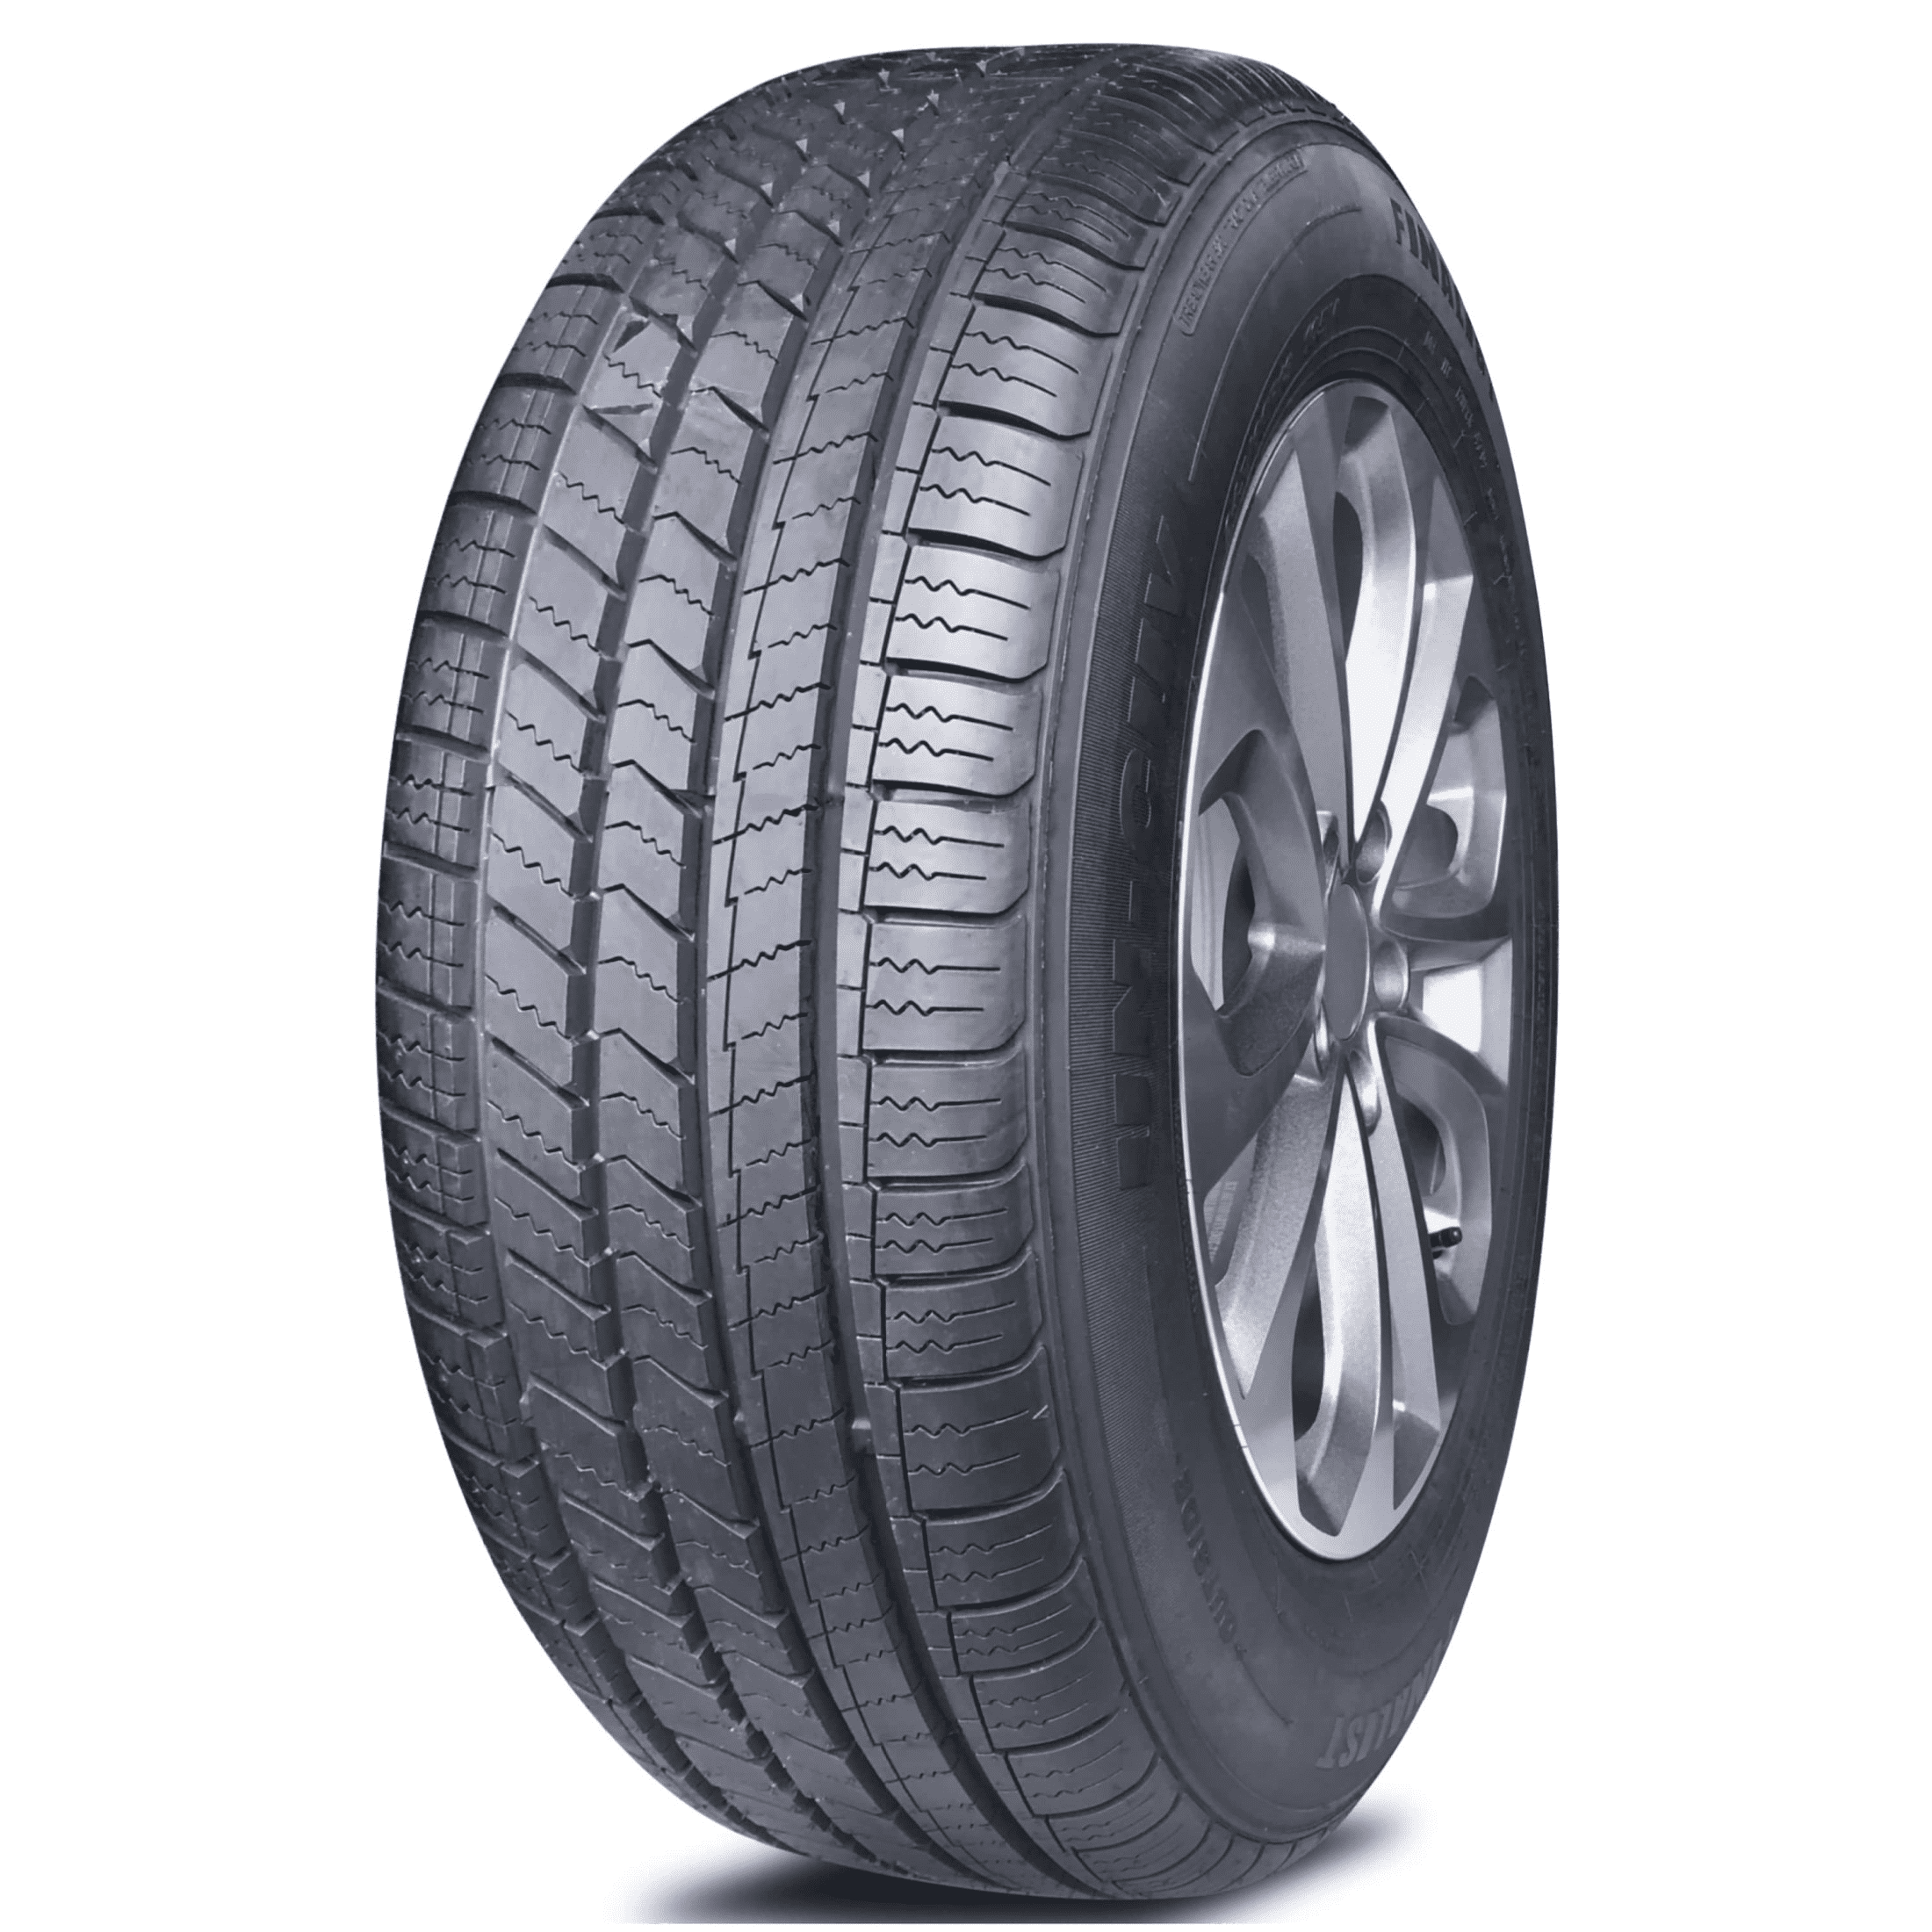 Finalist UN-CUV 235/65R17 108V All Season XL Extra Load CUV SUV A/S High  Performance Tire 235/65/17 (Tire Only)